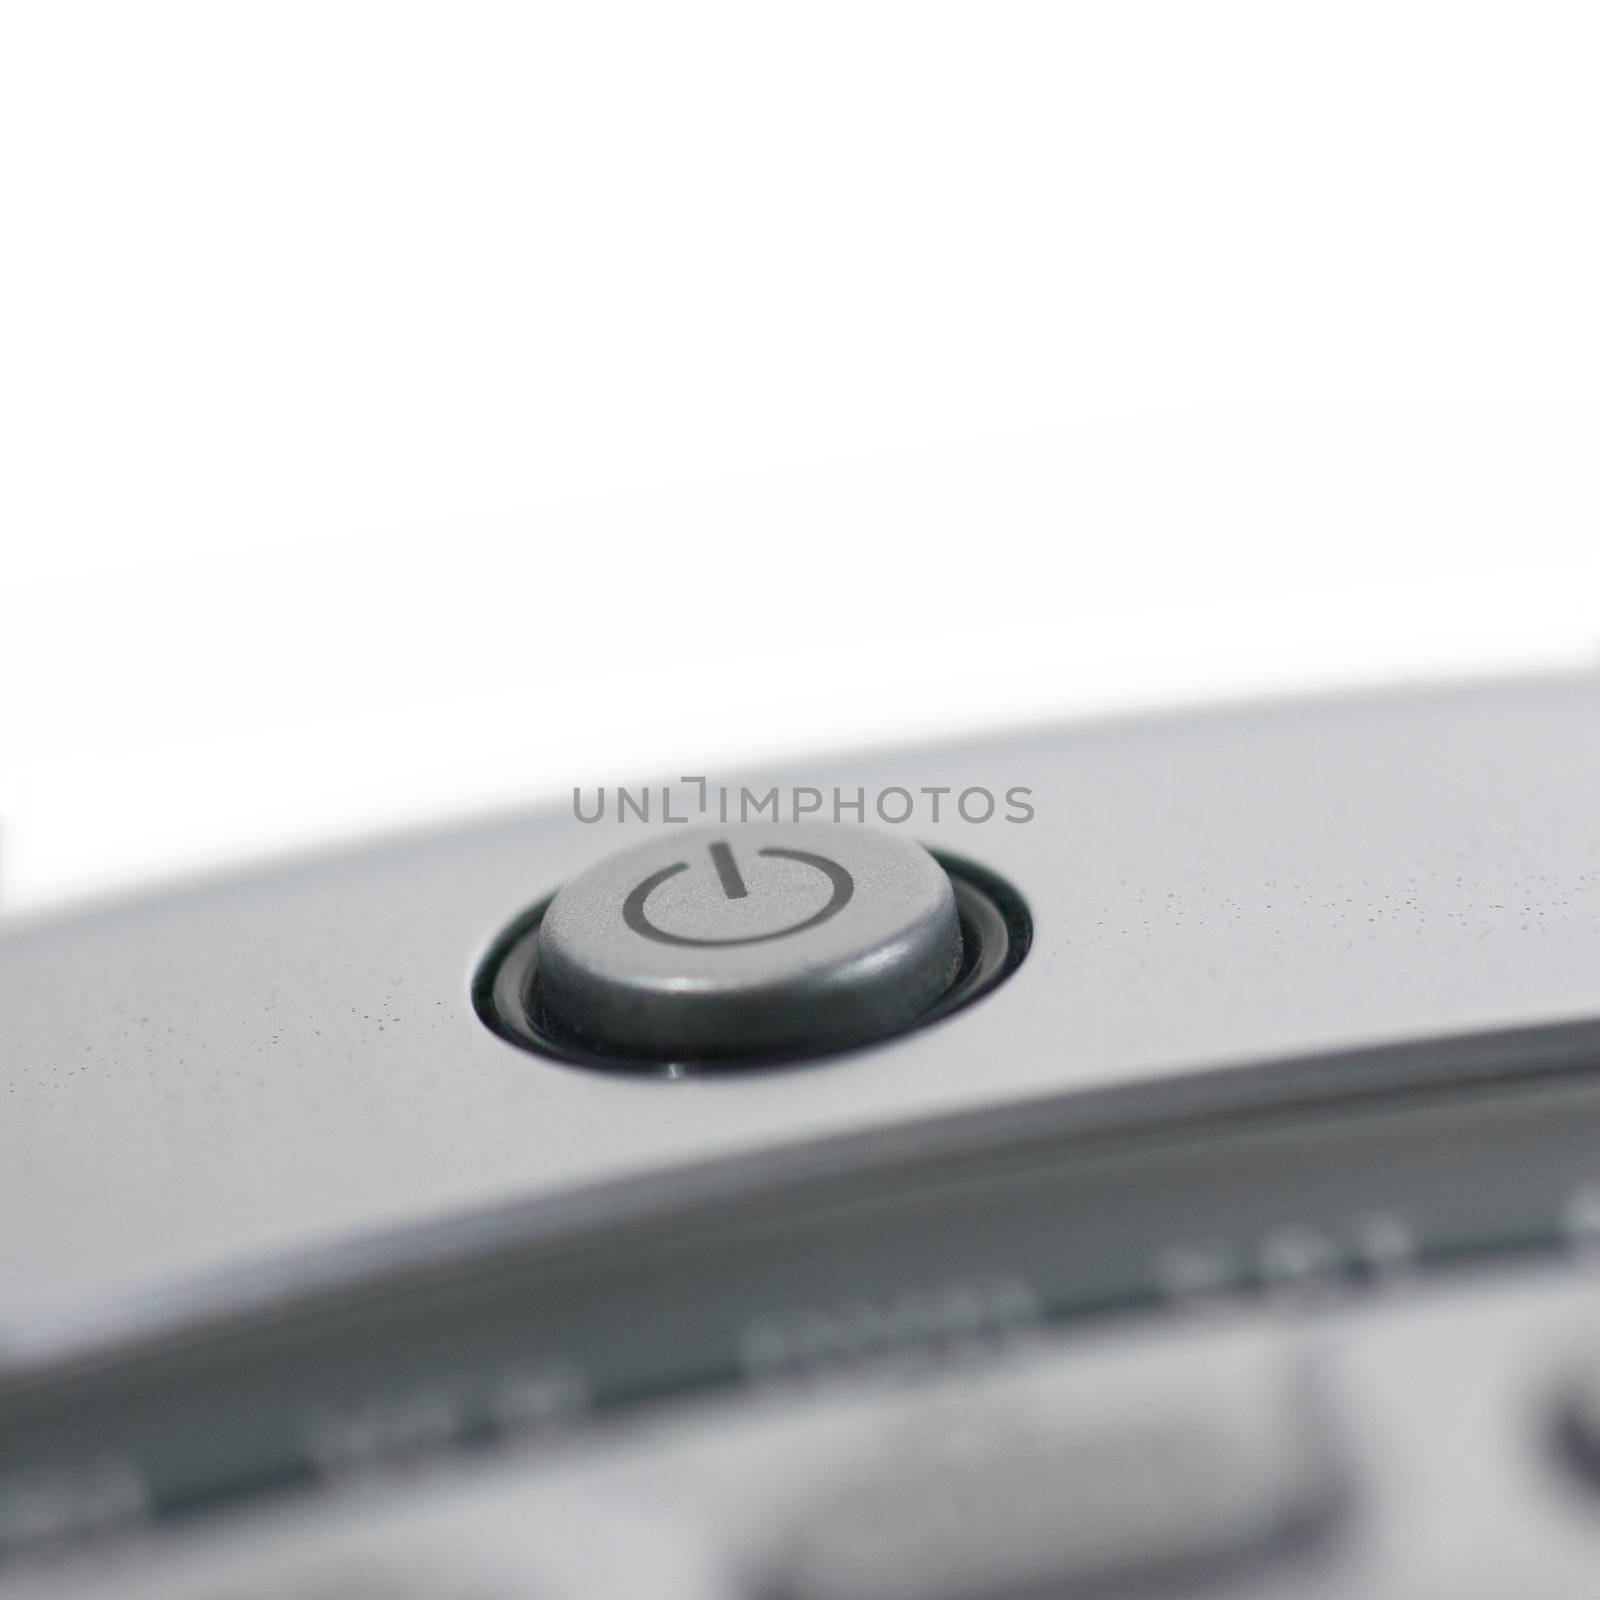 Closeup of a tv remote control, focus on the power button.